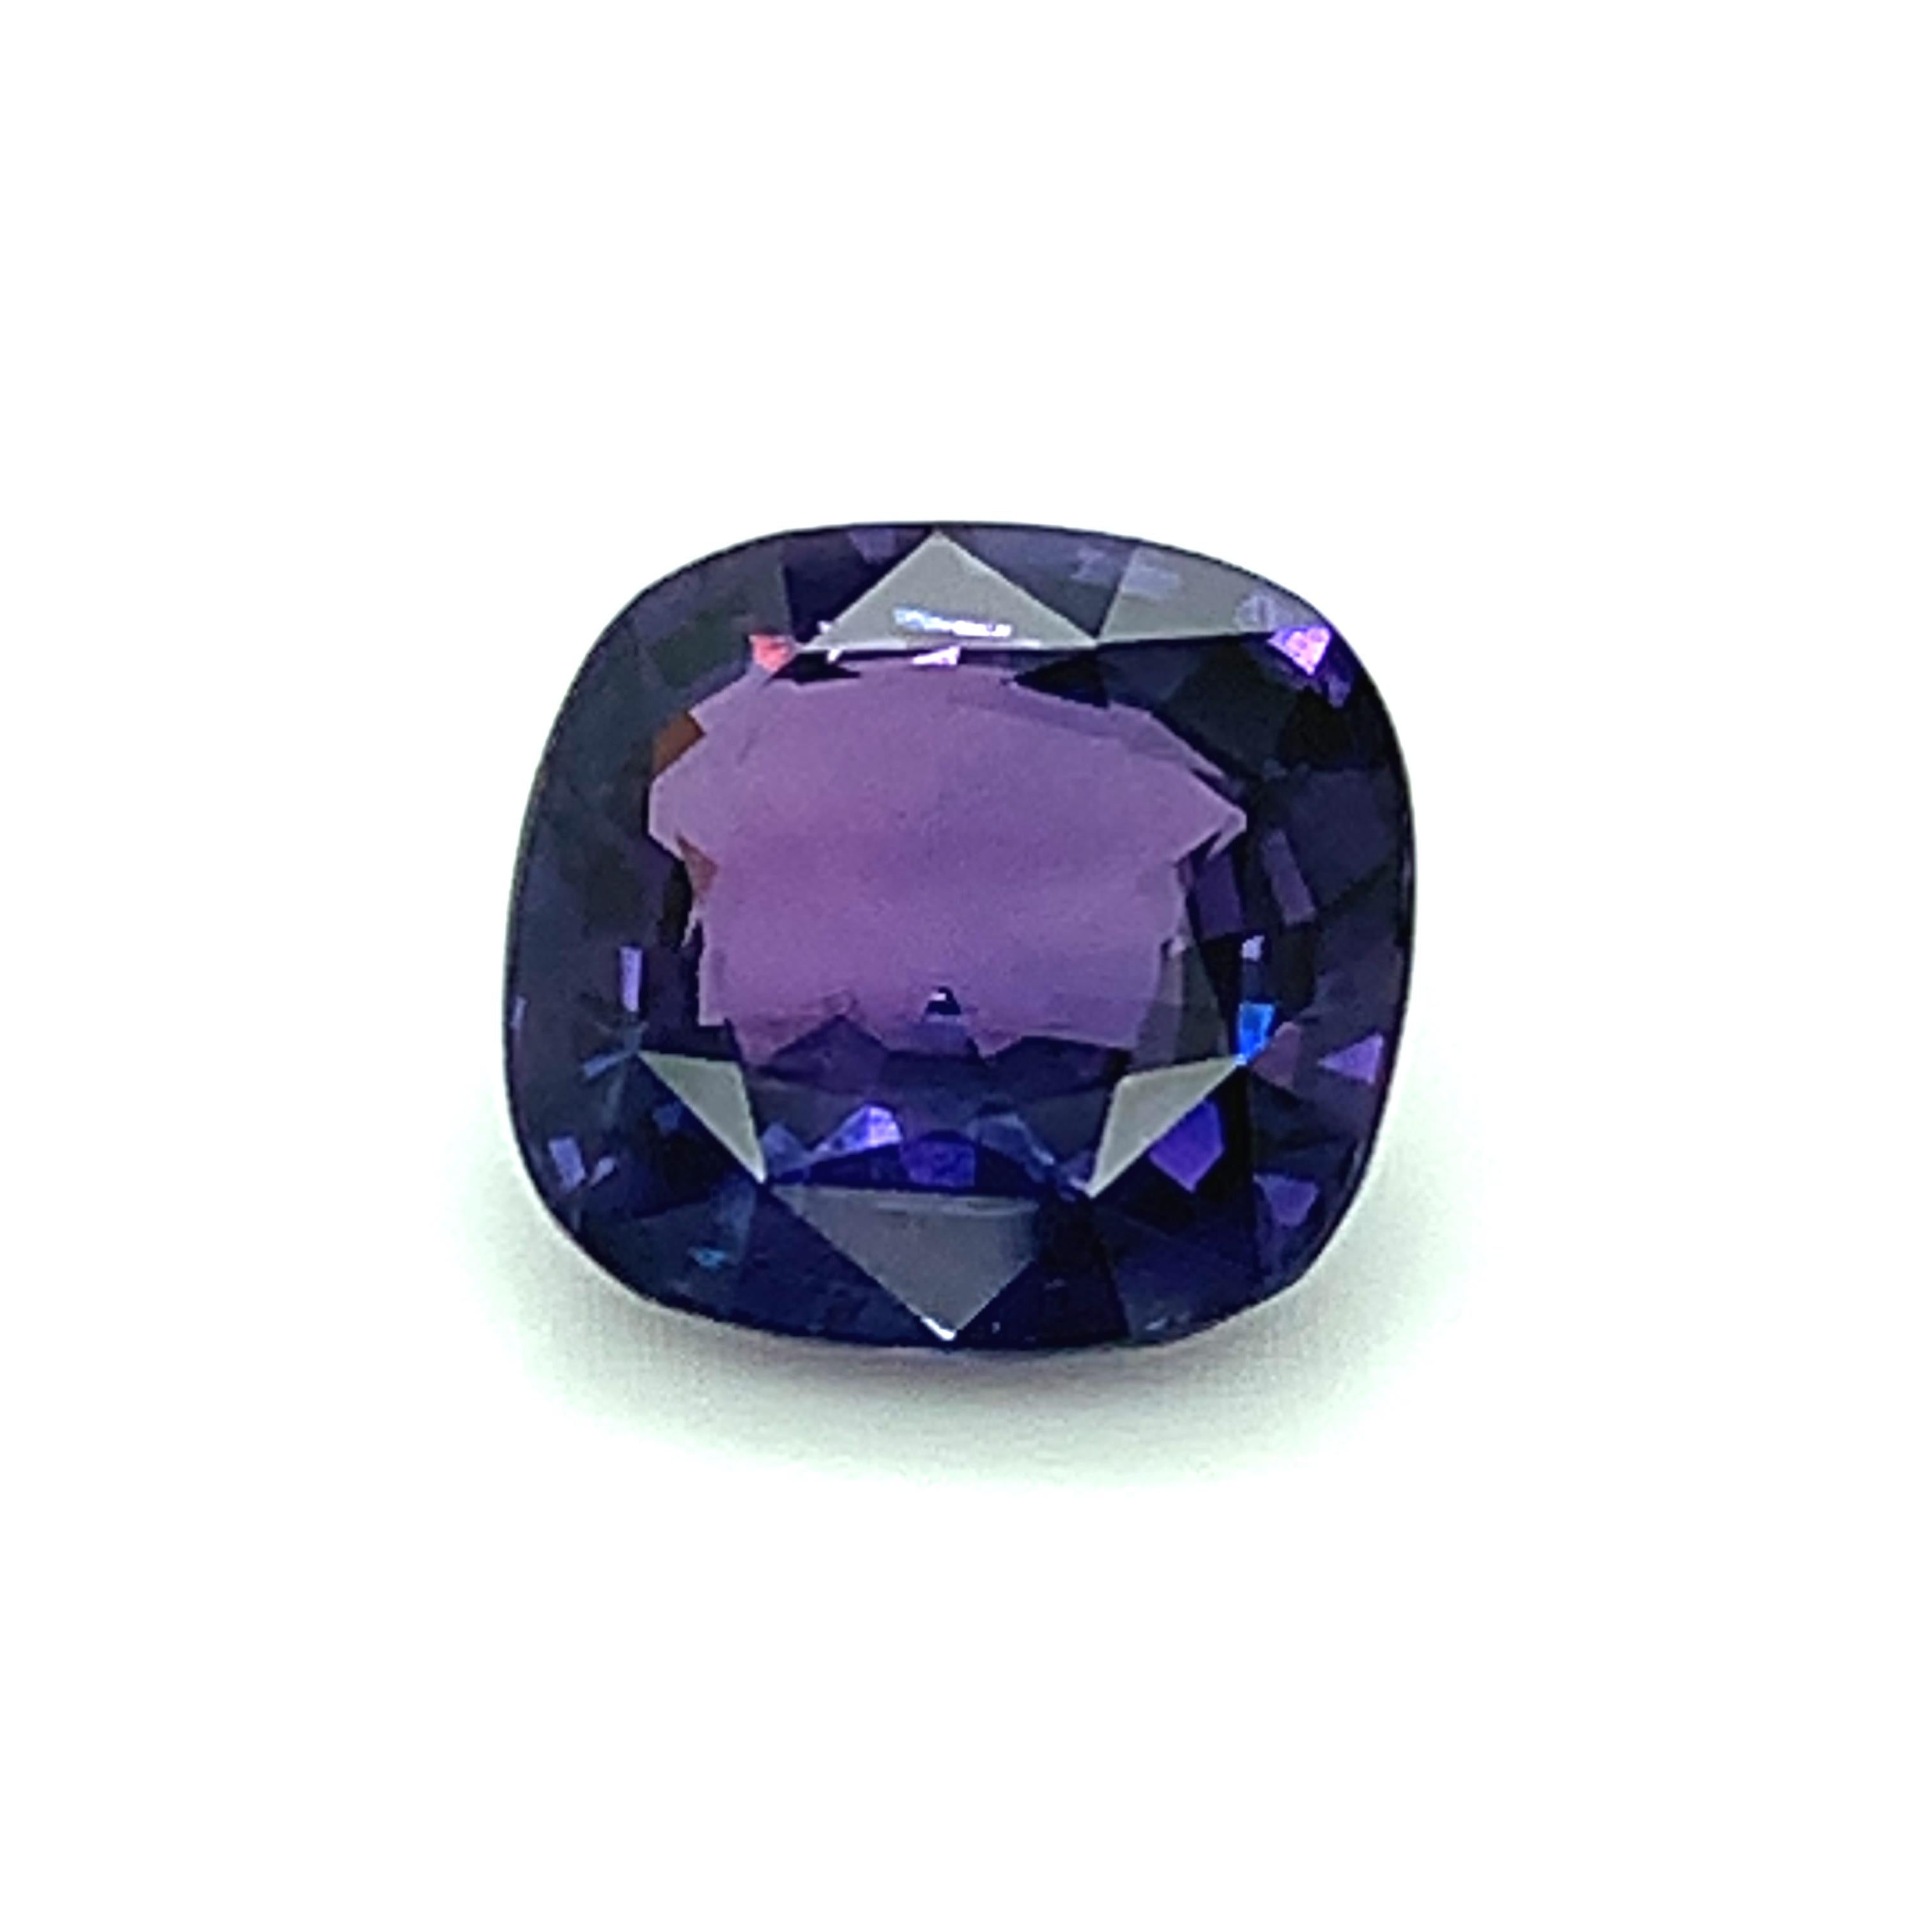 6.76 Carat Color Change Sapphire Cushion, Unset Loose Gemstone, GIA Certified 4